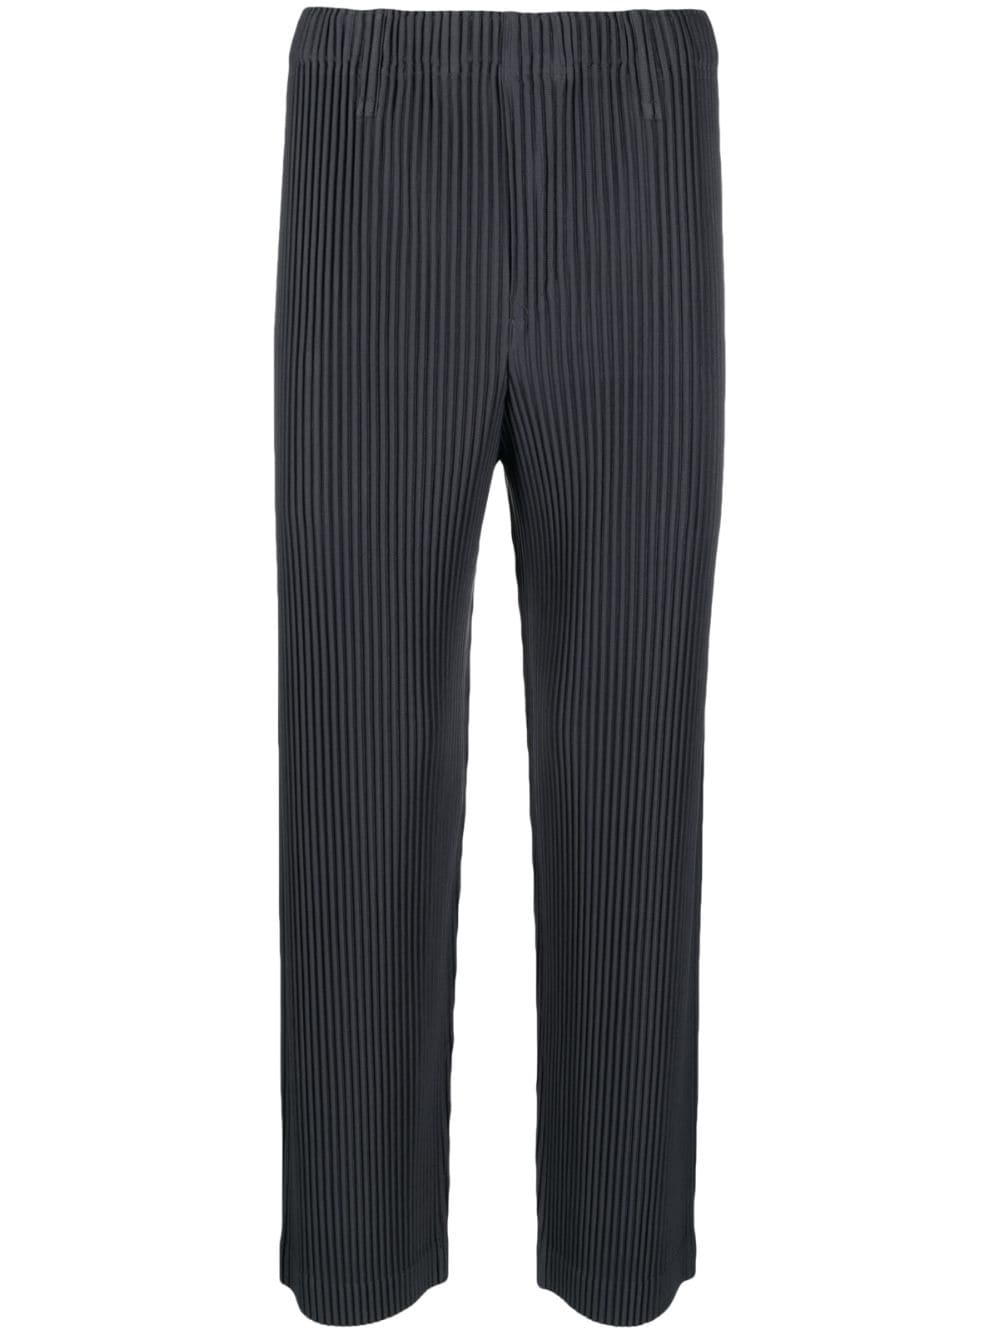 Homme Plissé Issey Miyake Tailored Pleats 2 Trousers - Farfetch